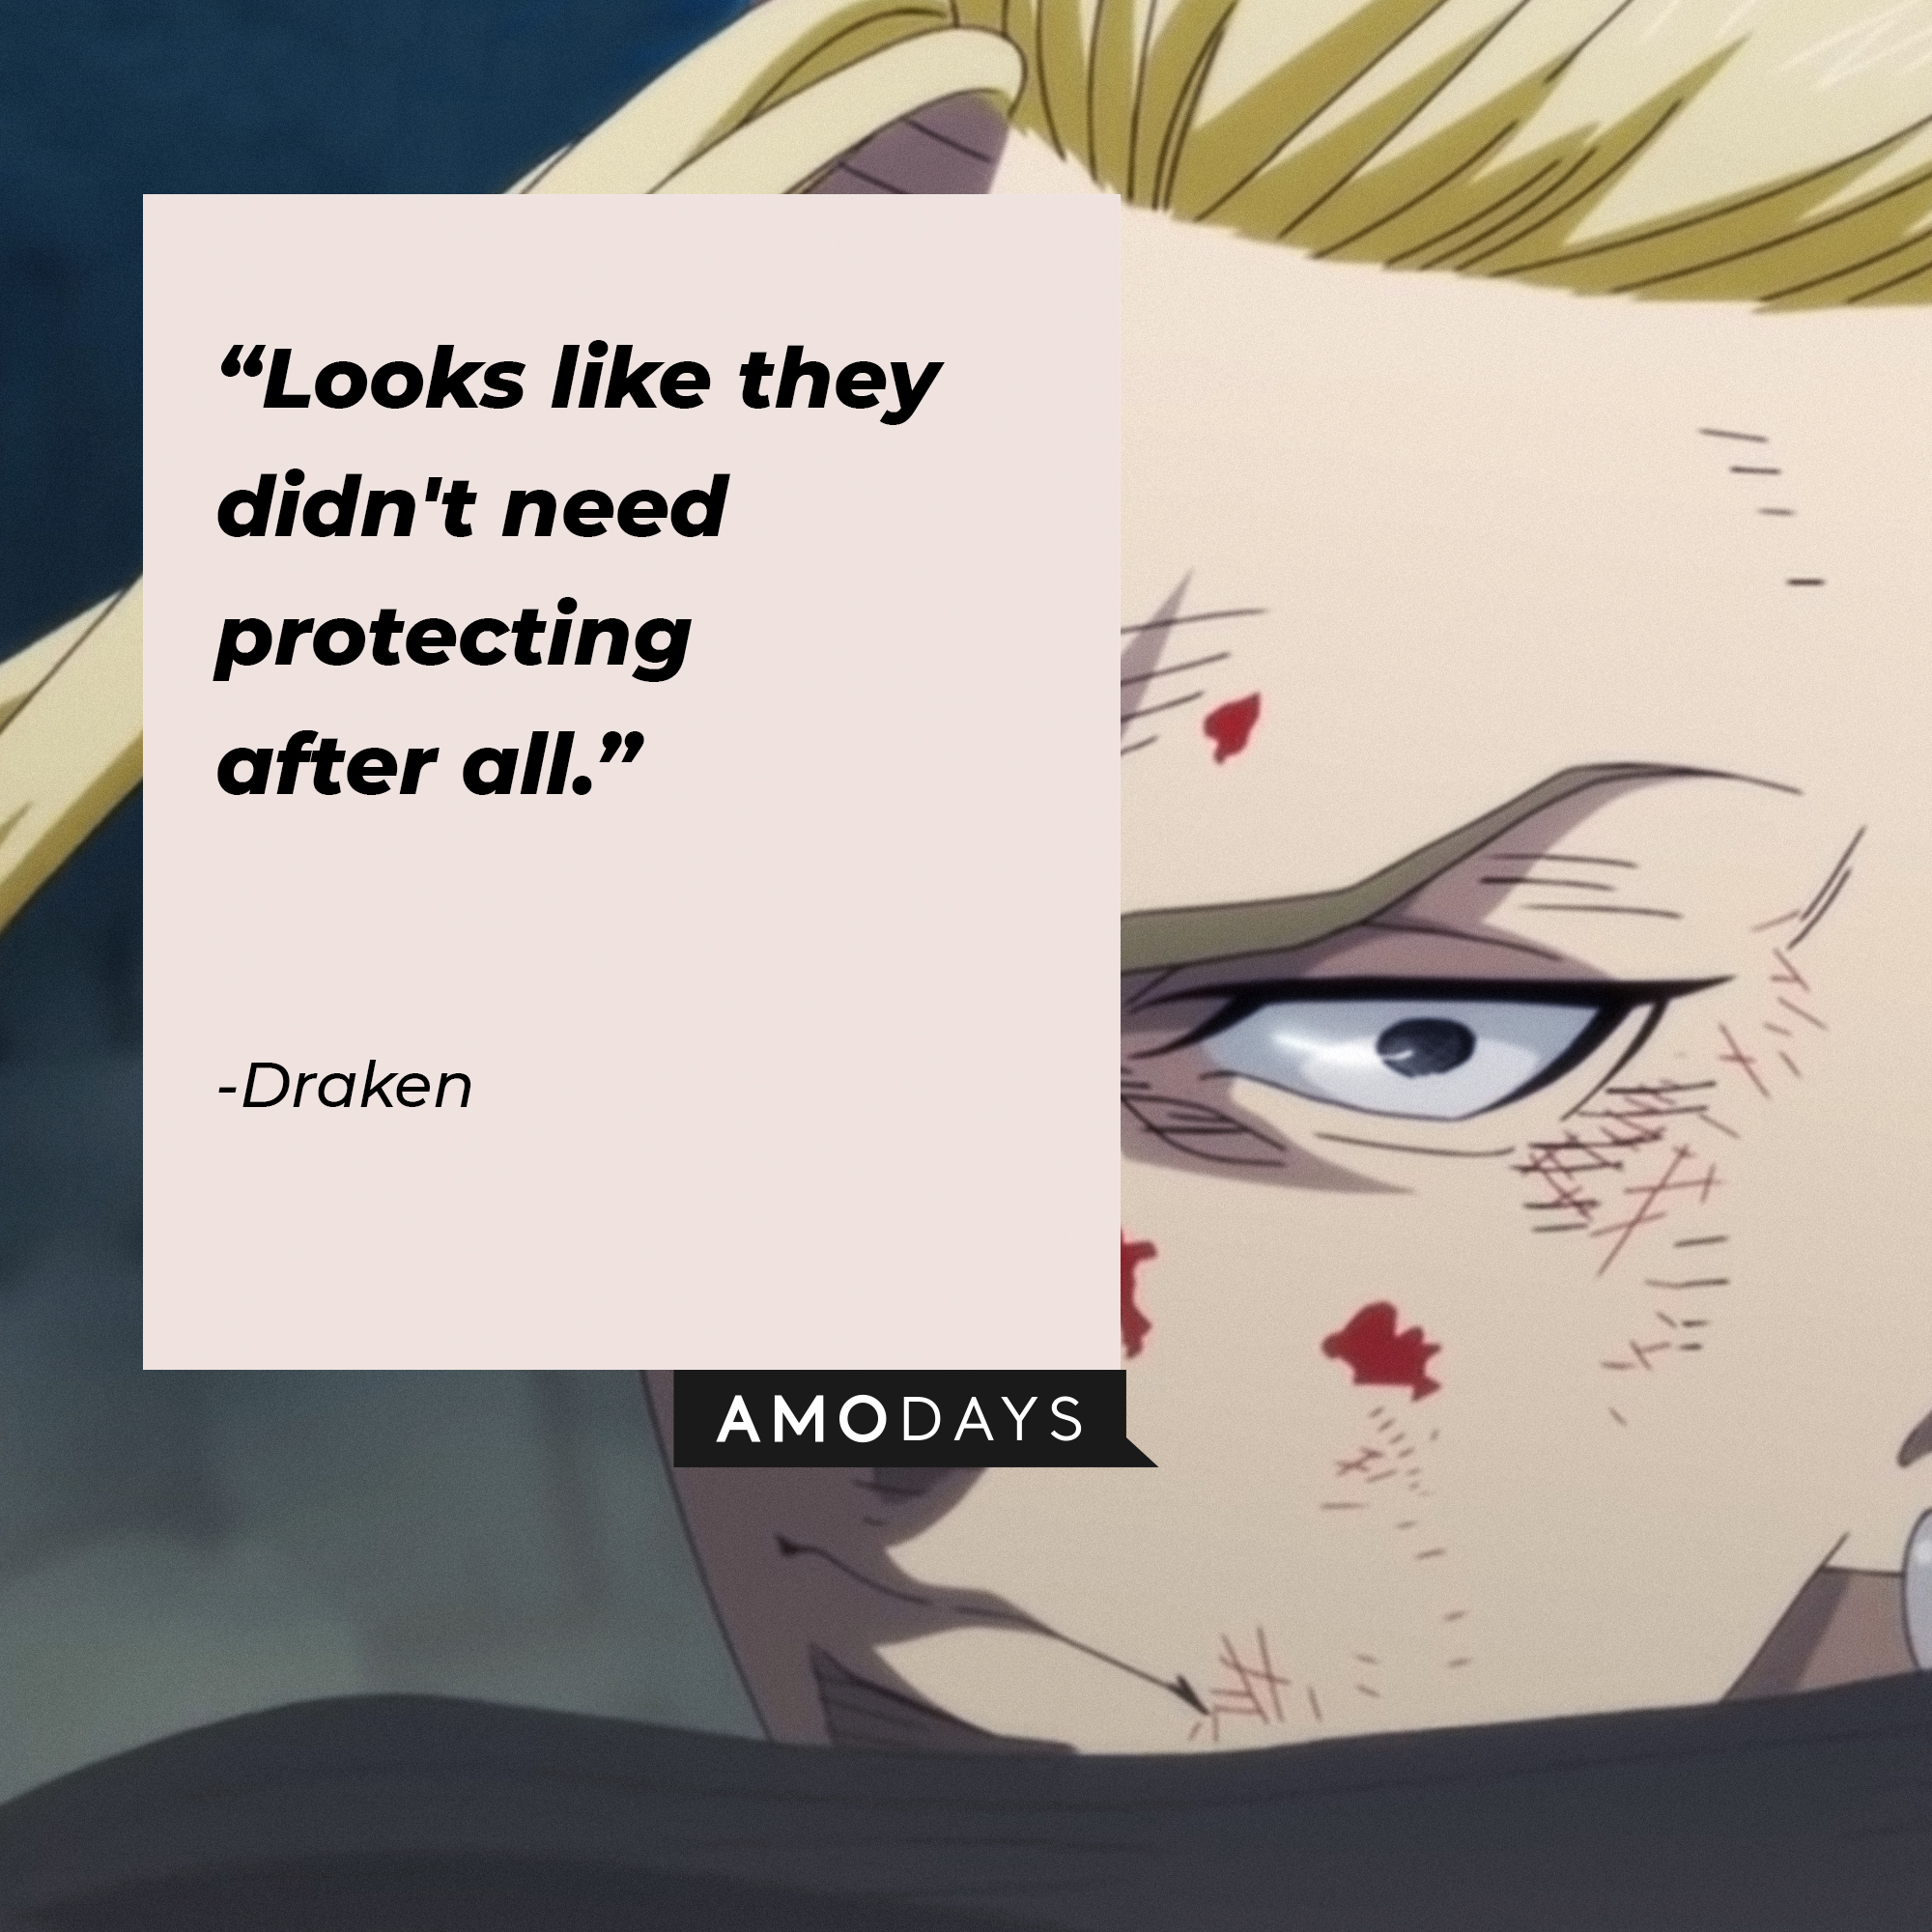 Draken's quote: "Looks like they didn't need protecting after all." | Source: Youtube.com/Crunchyroll Collection